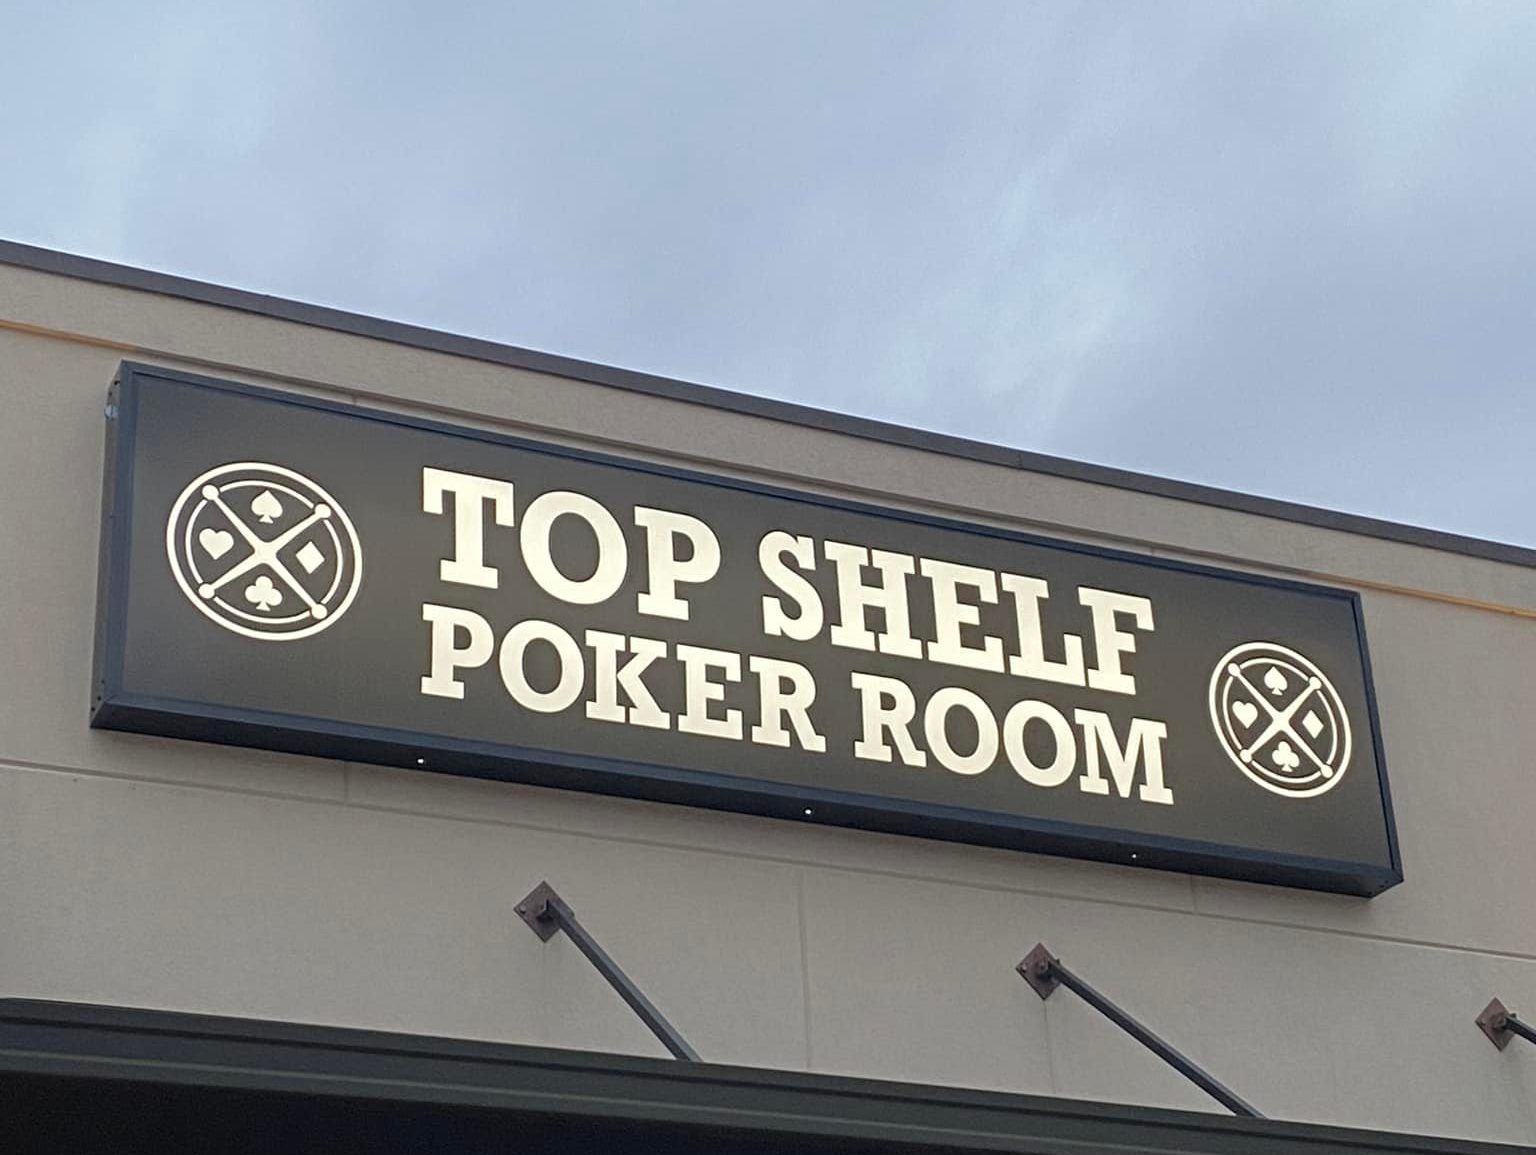 East Texas Poker Room Shut Down by Sheriff and District Attorney, Owners Seek Help